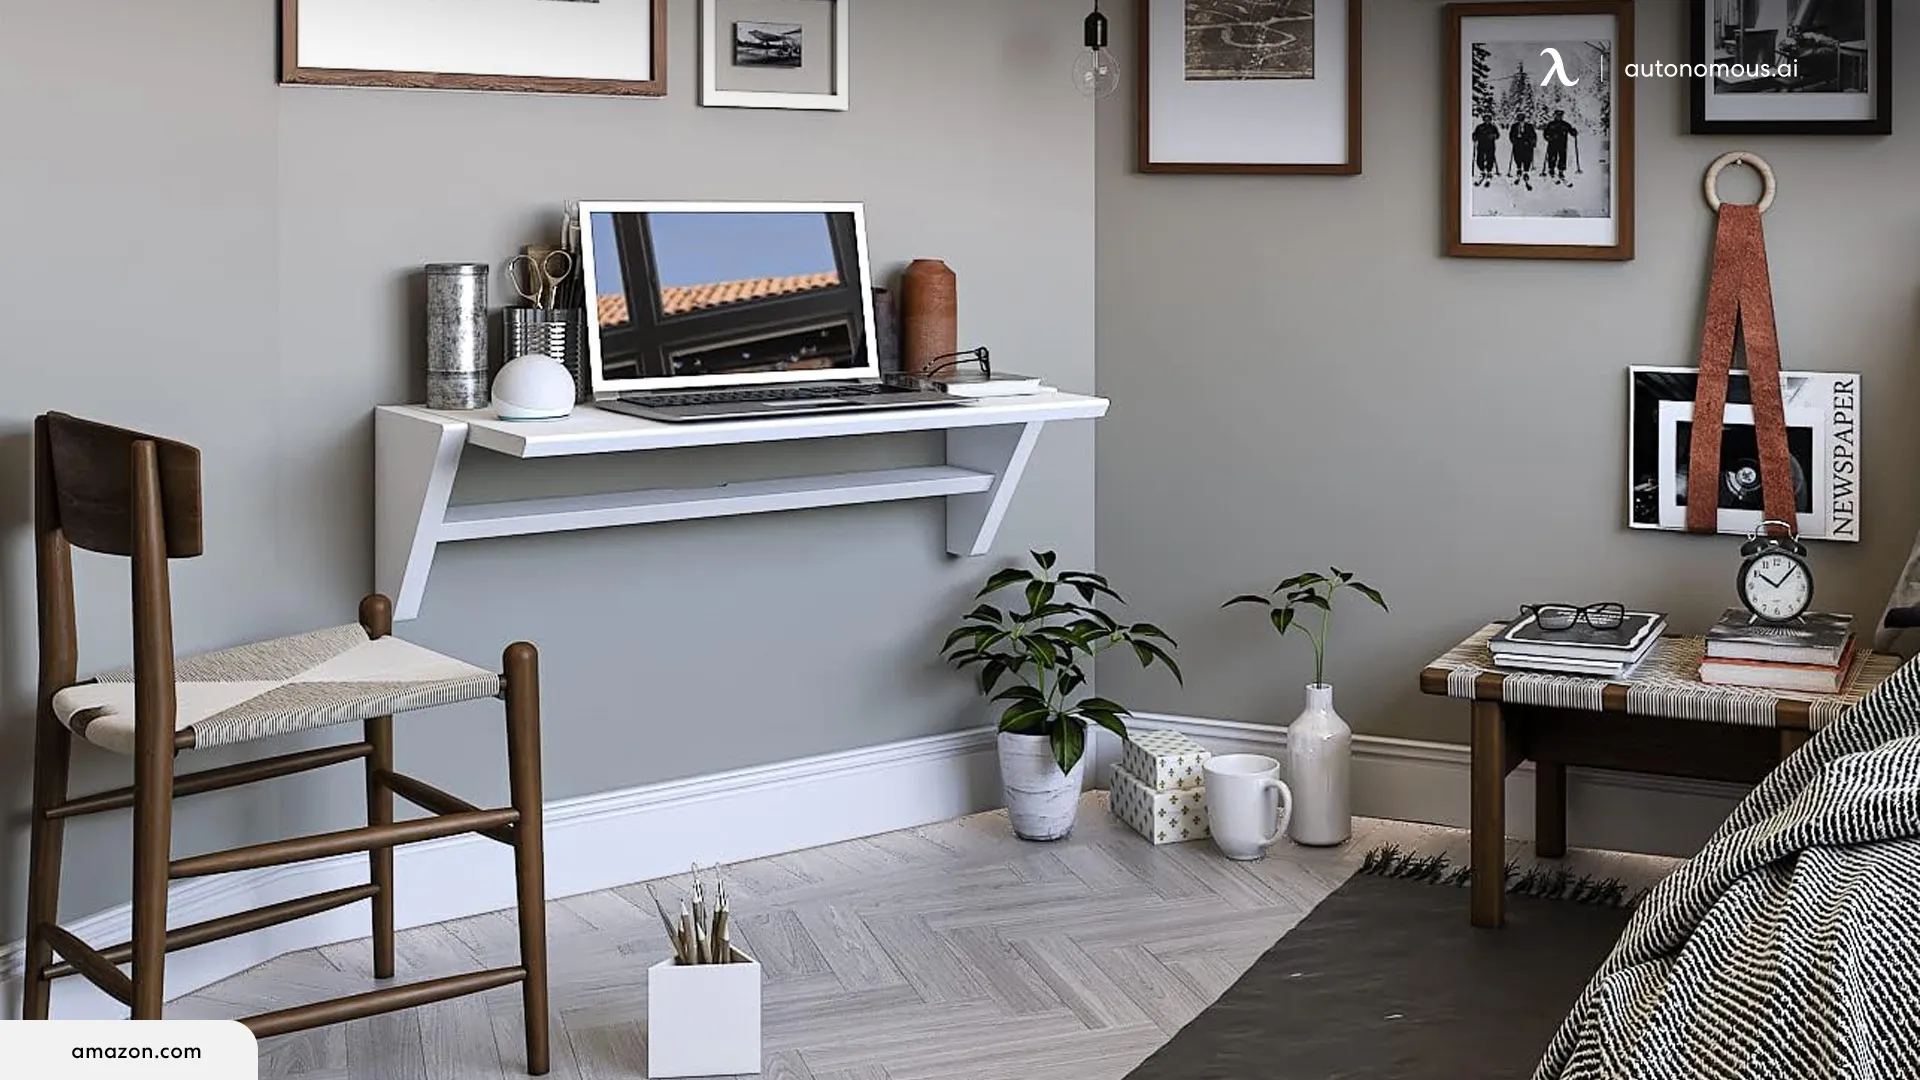 London Bedroom Office with Wall Mounted Desk